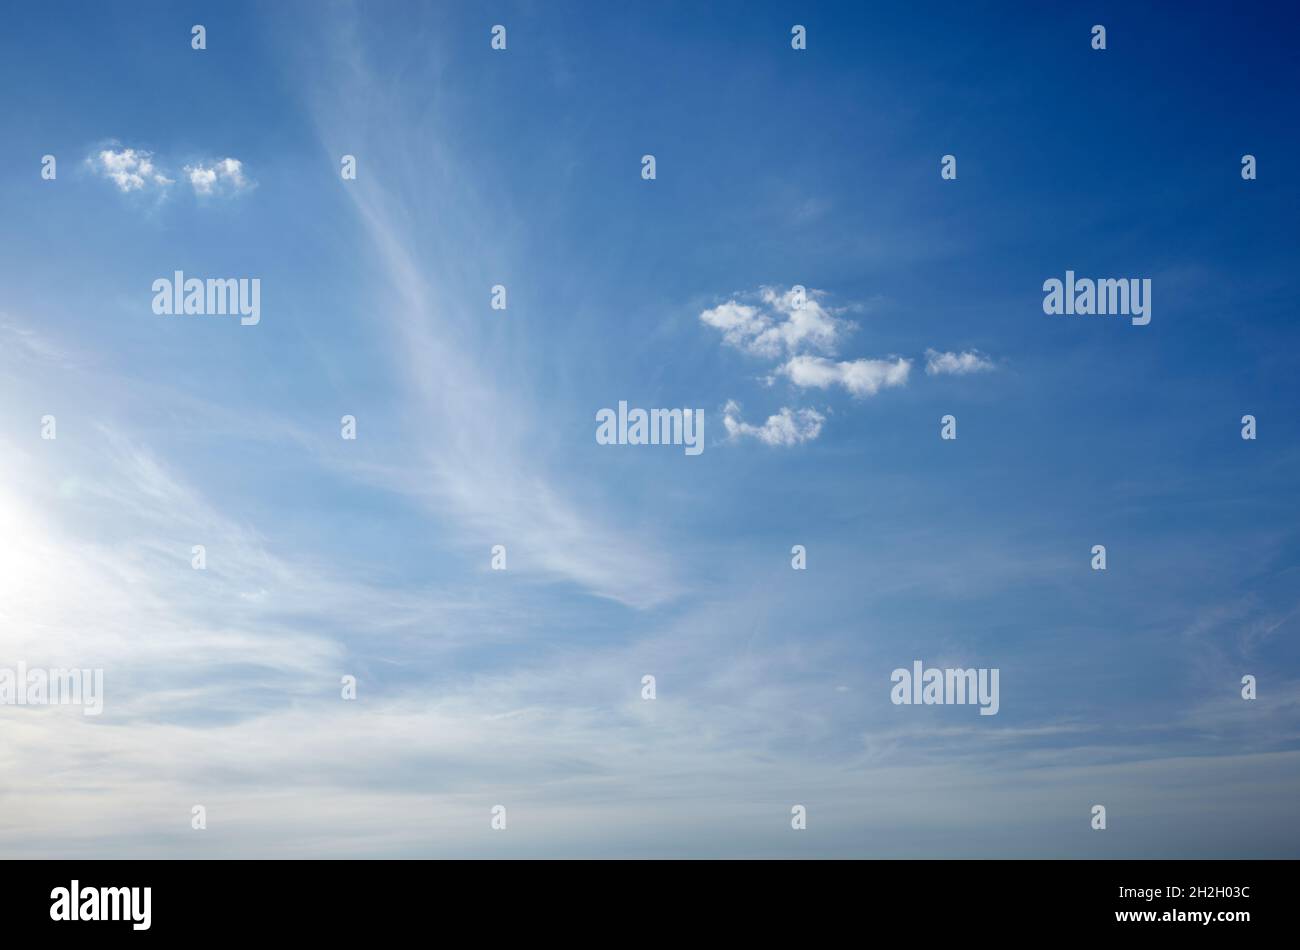 Abstract image of blurred sky. Blue sky background Stock Photo